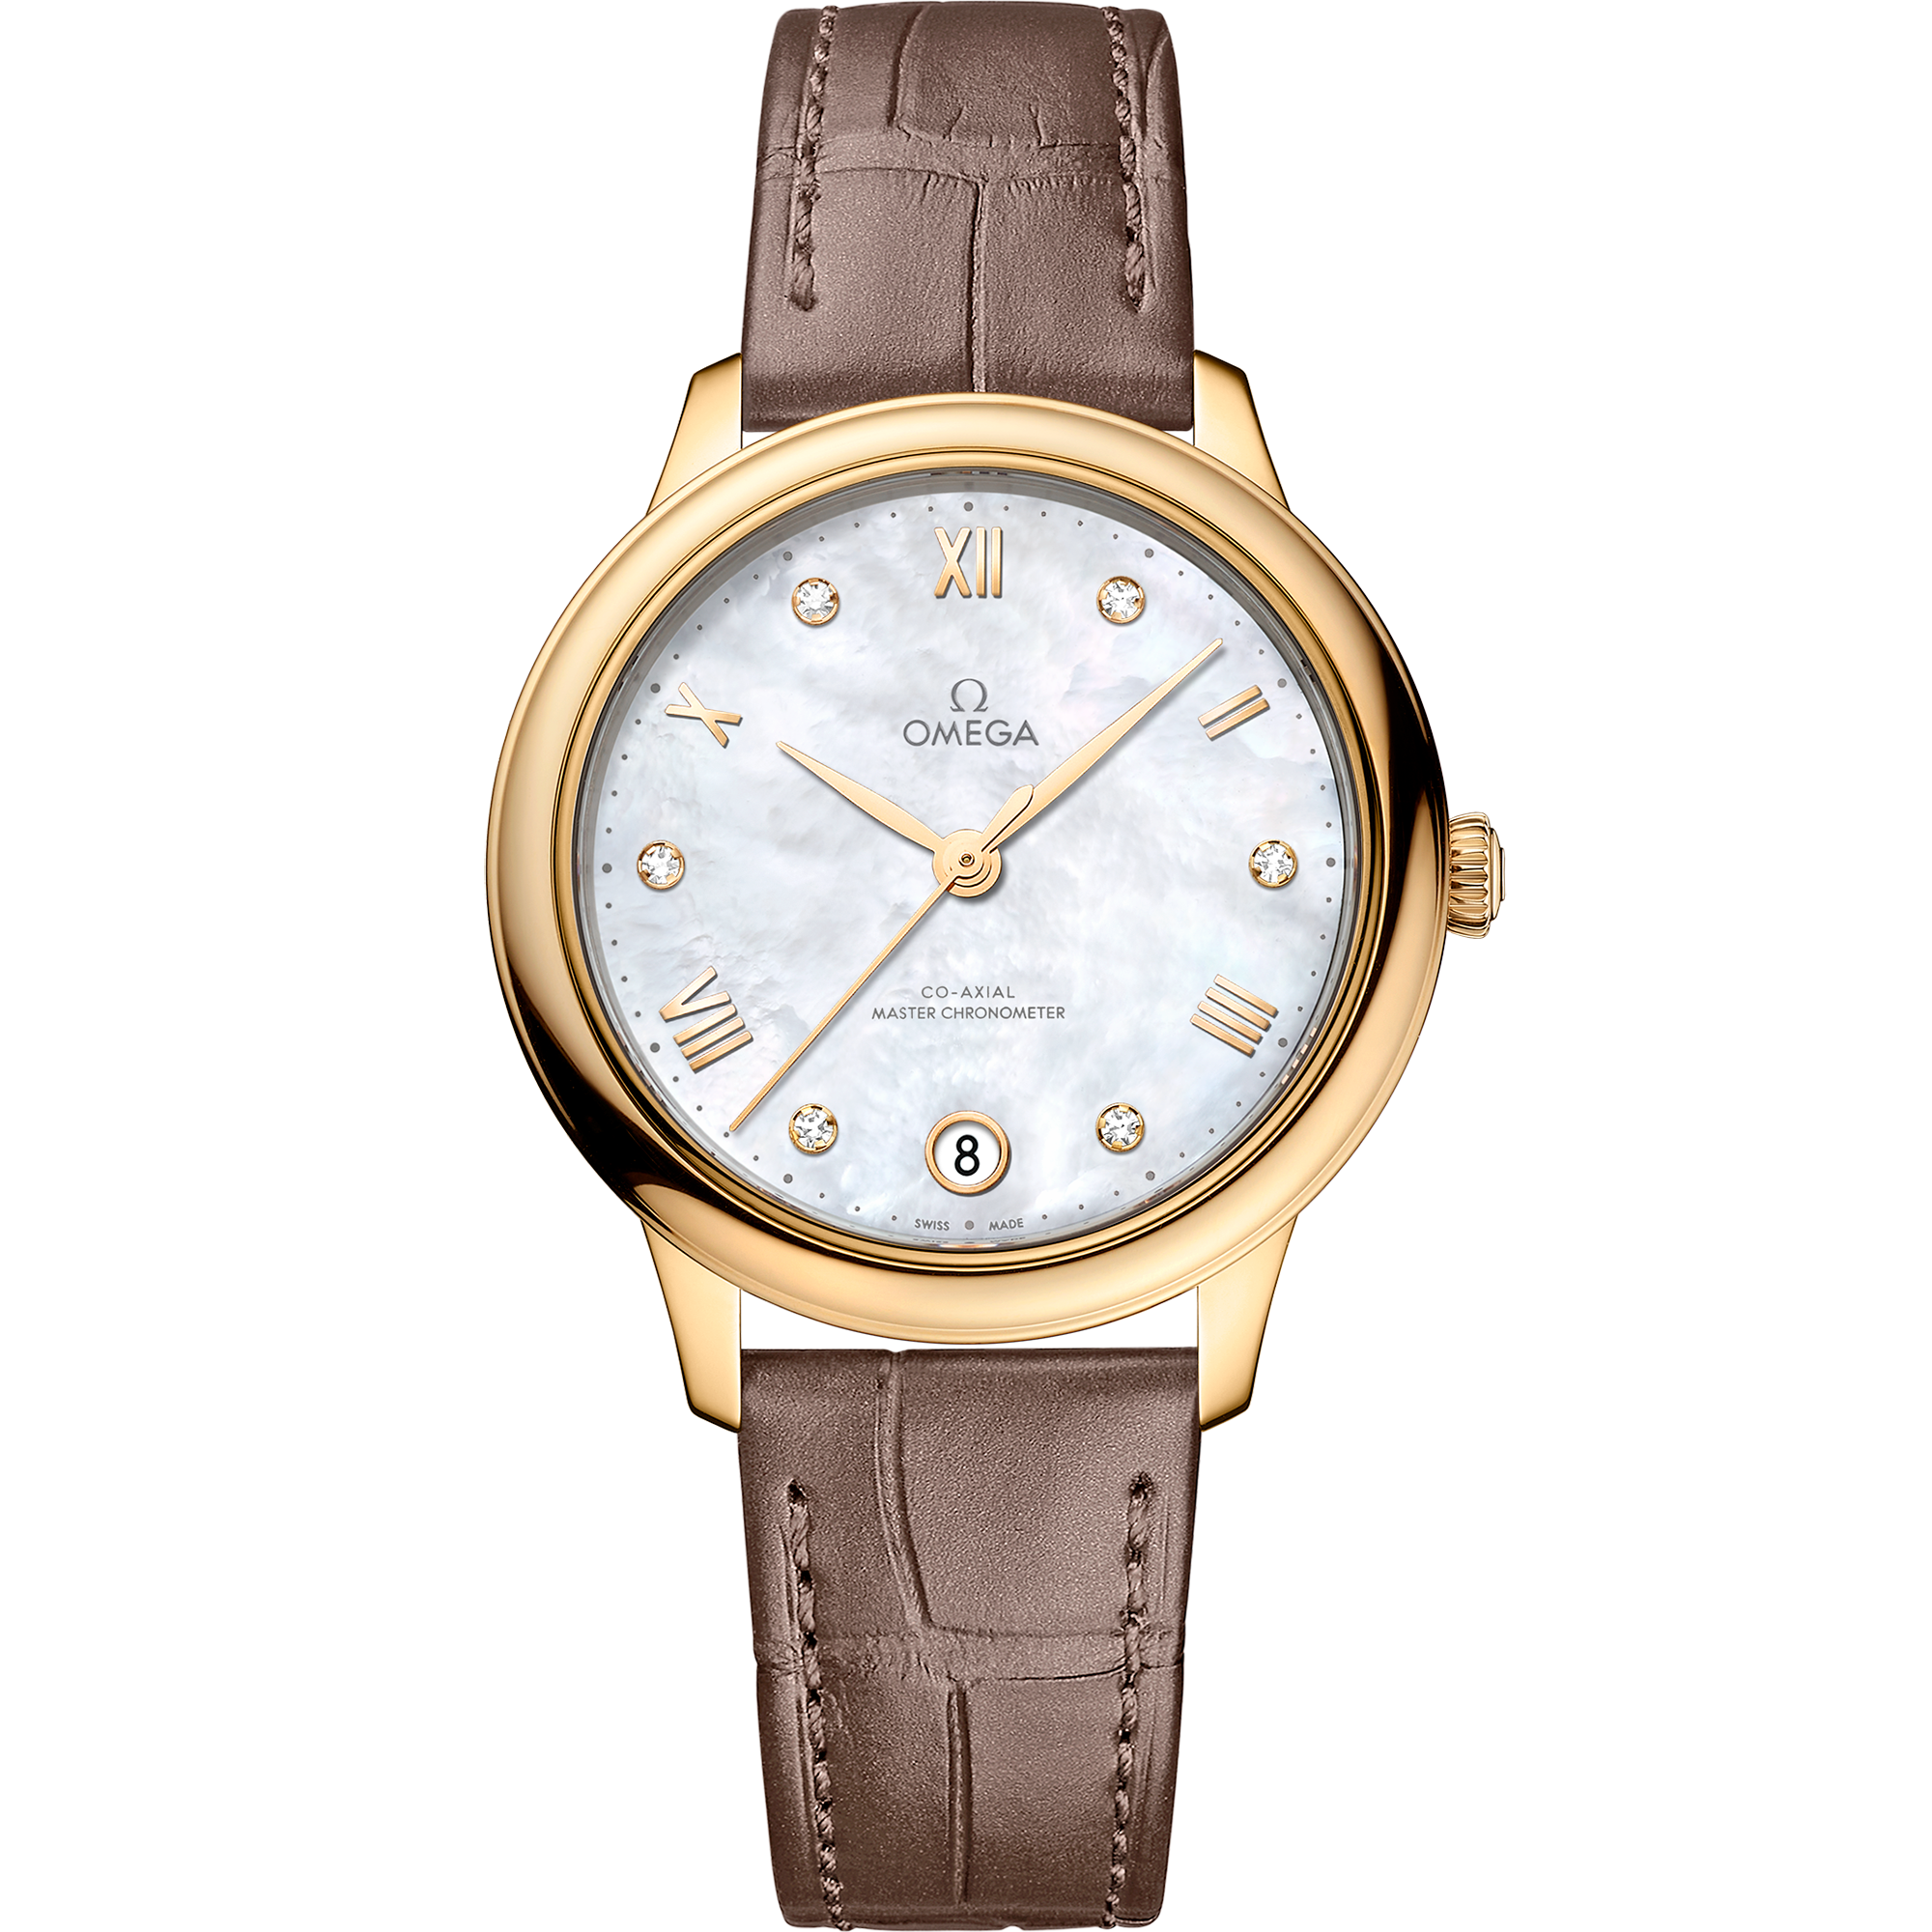 White dial watch on Yellow gold case with Leather strap - De Ville Prestige 34 mm, yellow gold on leather strap - 434.53.34.20.55.002